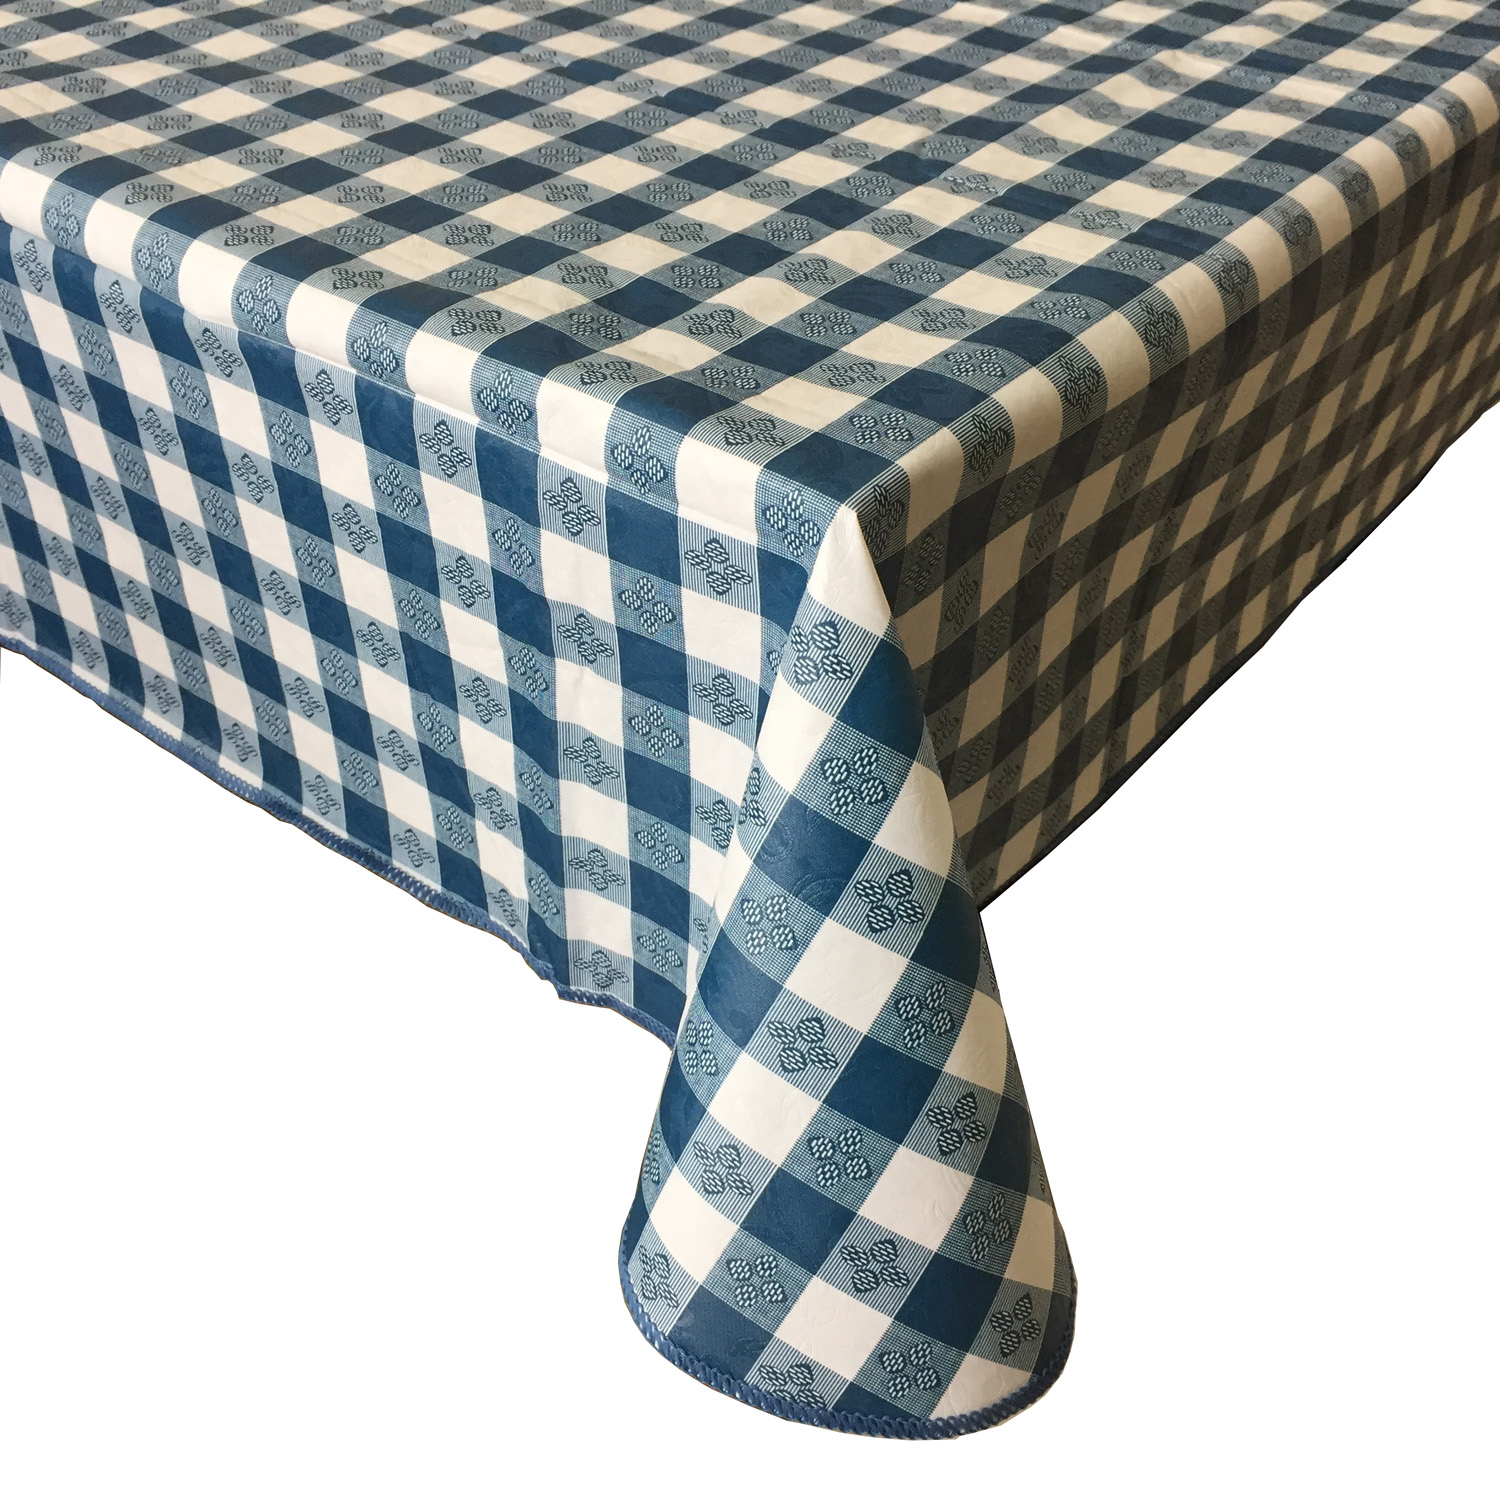 CAC China TCVG-52B Blue Vinyl Table Cover with Flannel Back 52" x 52"